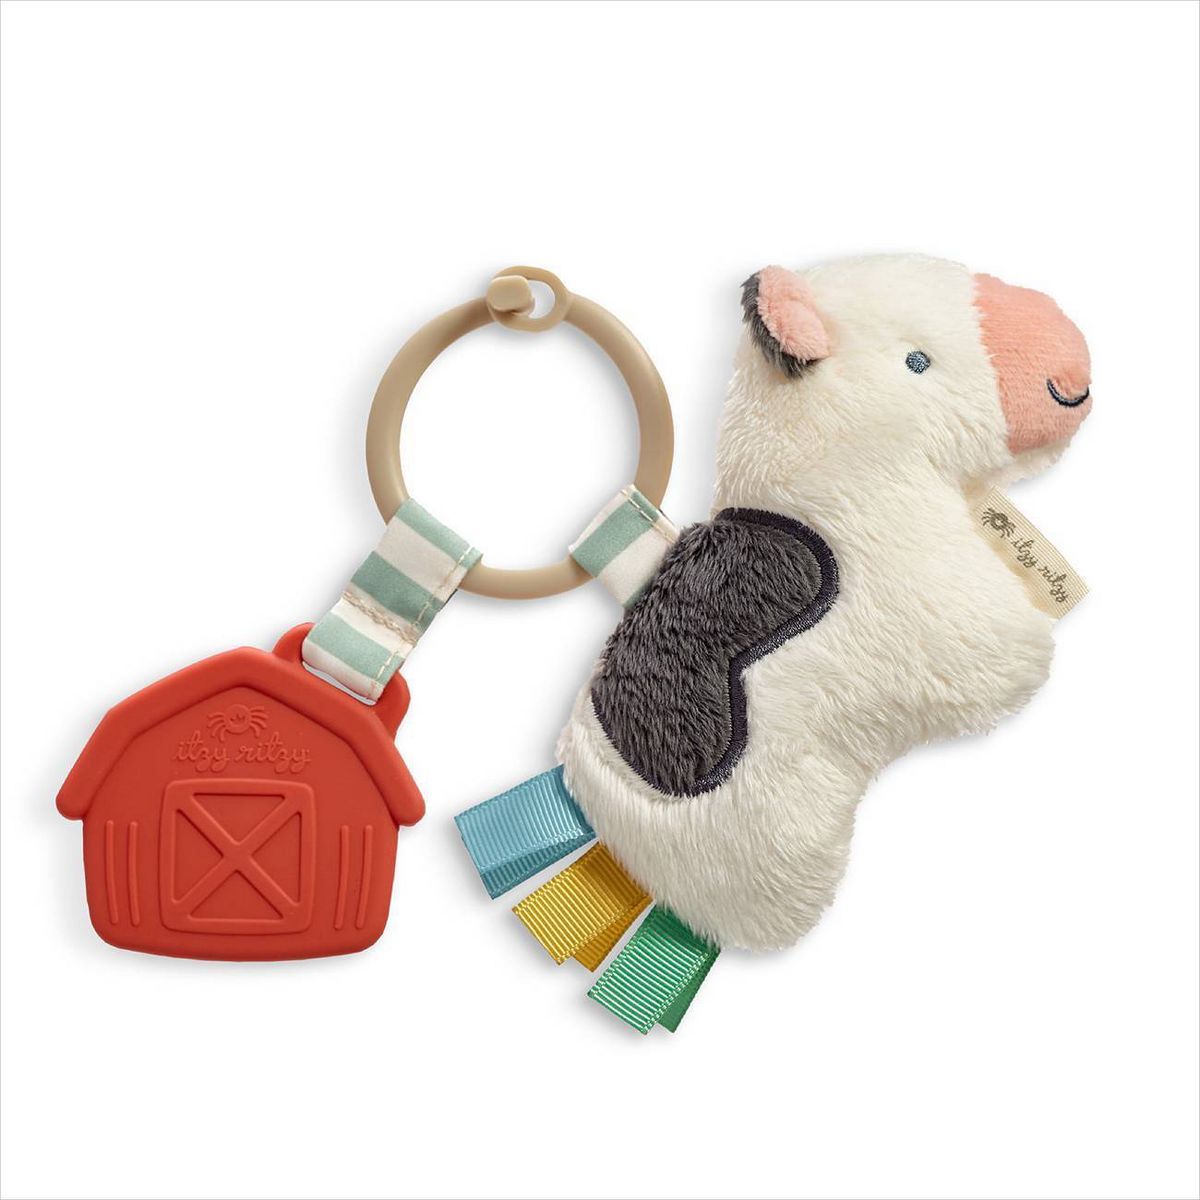 Itzy Ritzy Teether Pal Crib Toy - Cow | Target